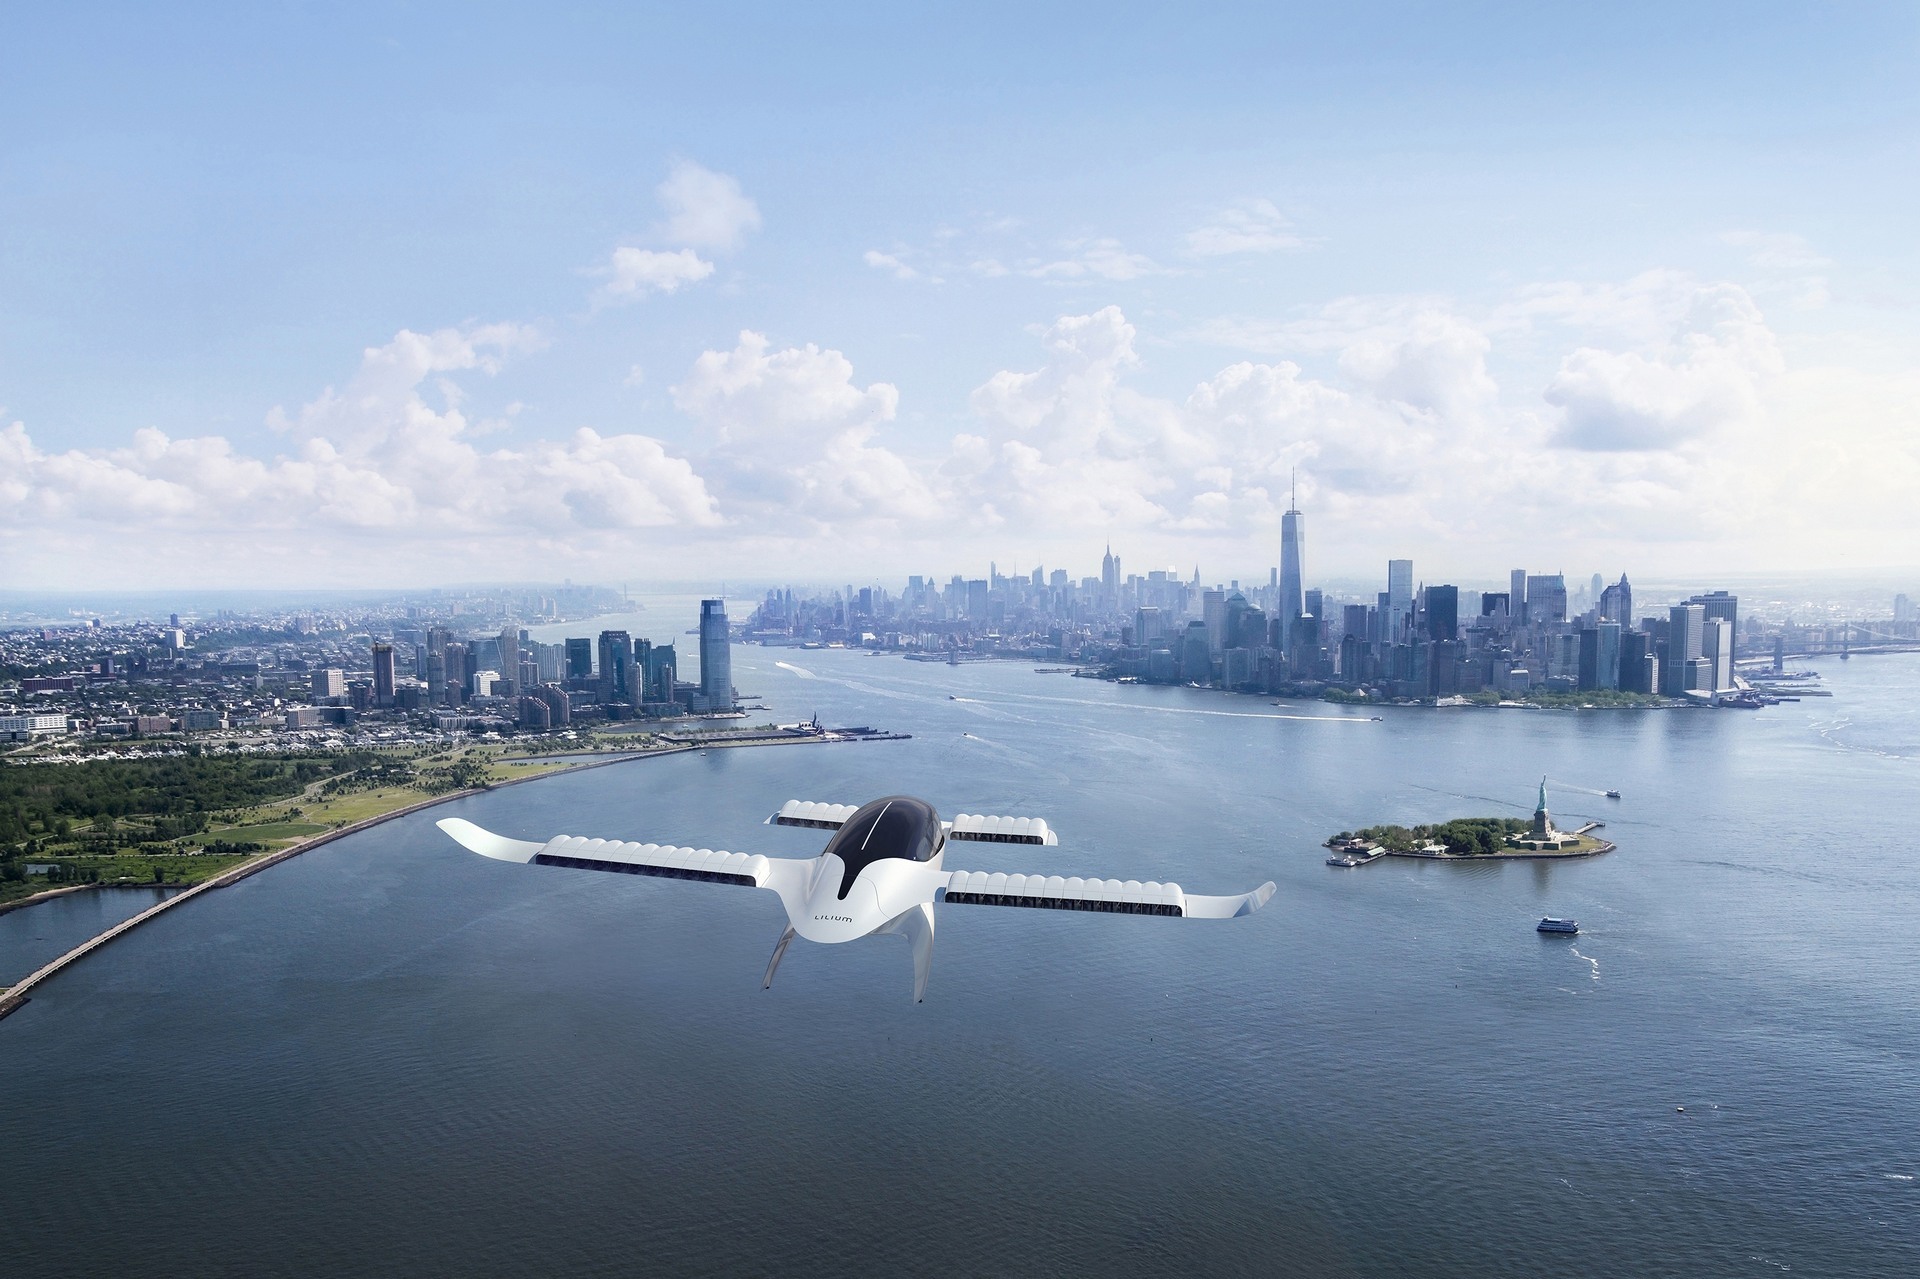 Is the air taxi the future of urban transportation?